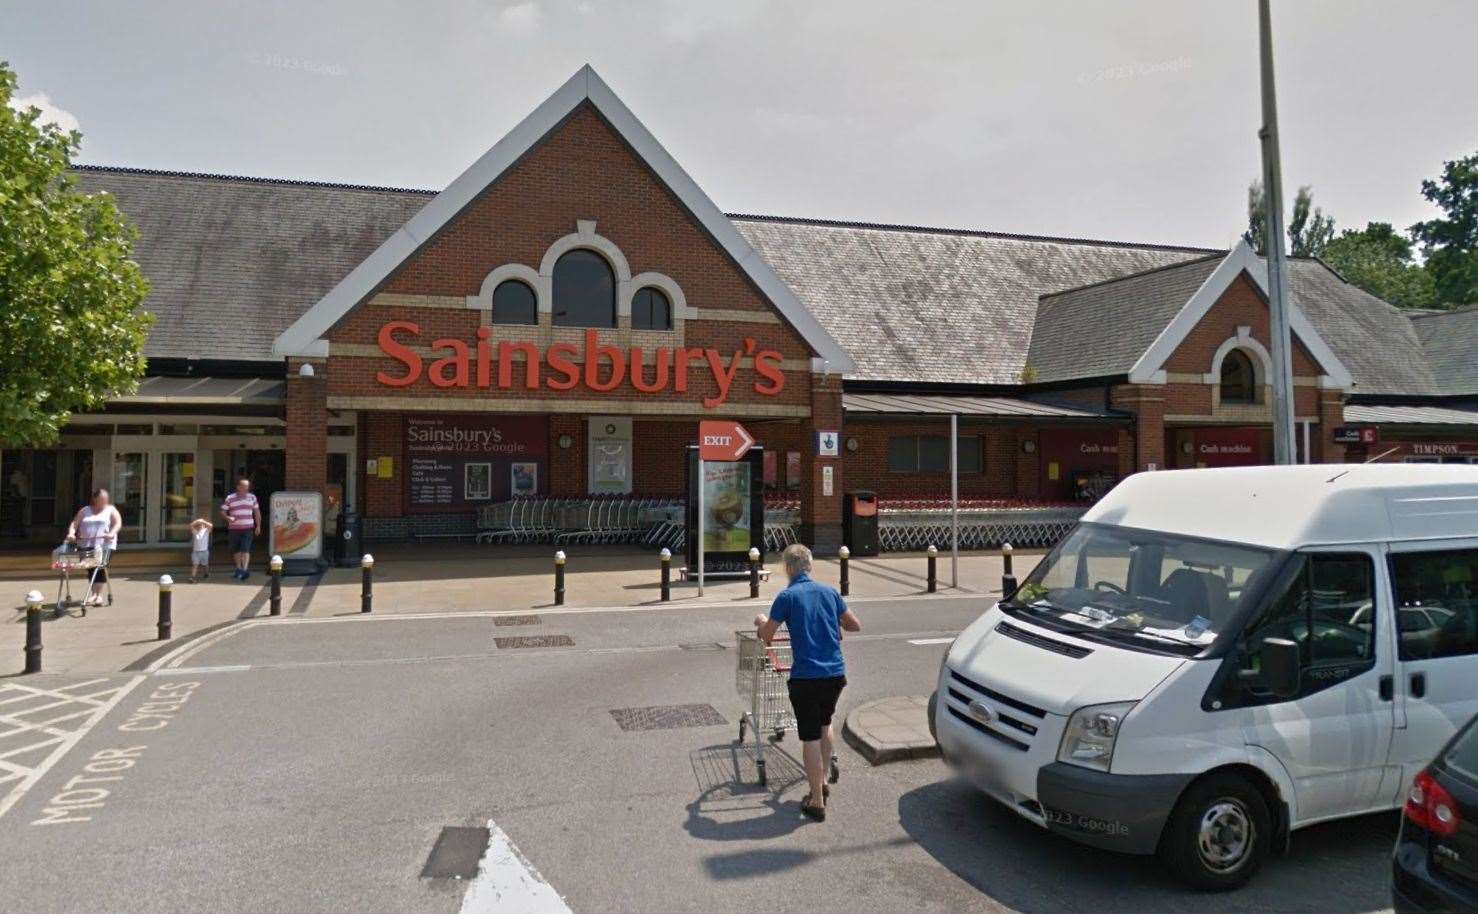 Images of the suspect were circulated after two thefts at Sainsbury’s in Linden Park Road, Tunbridge Wells. Picture: Google